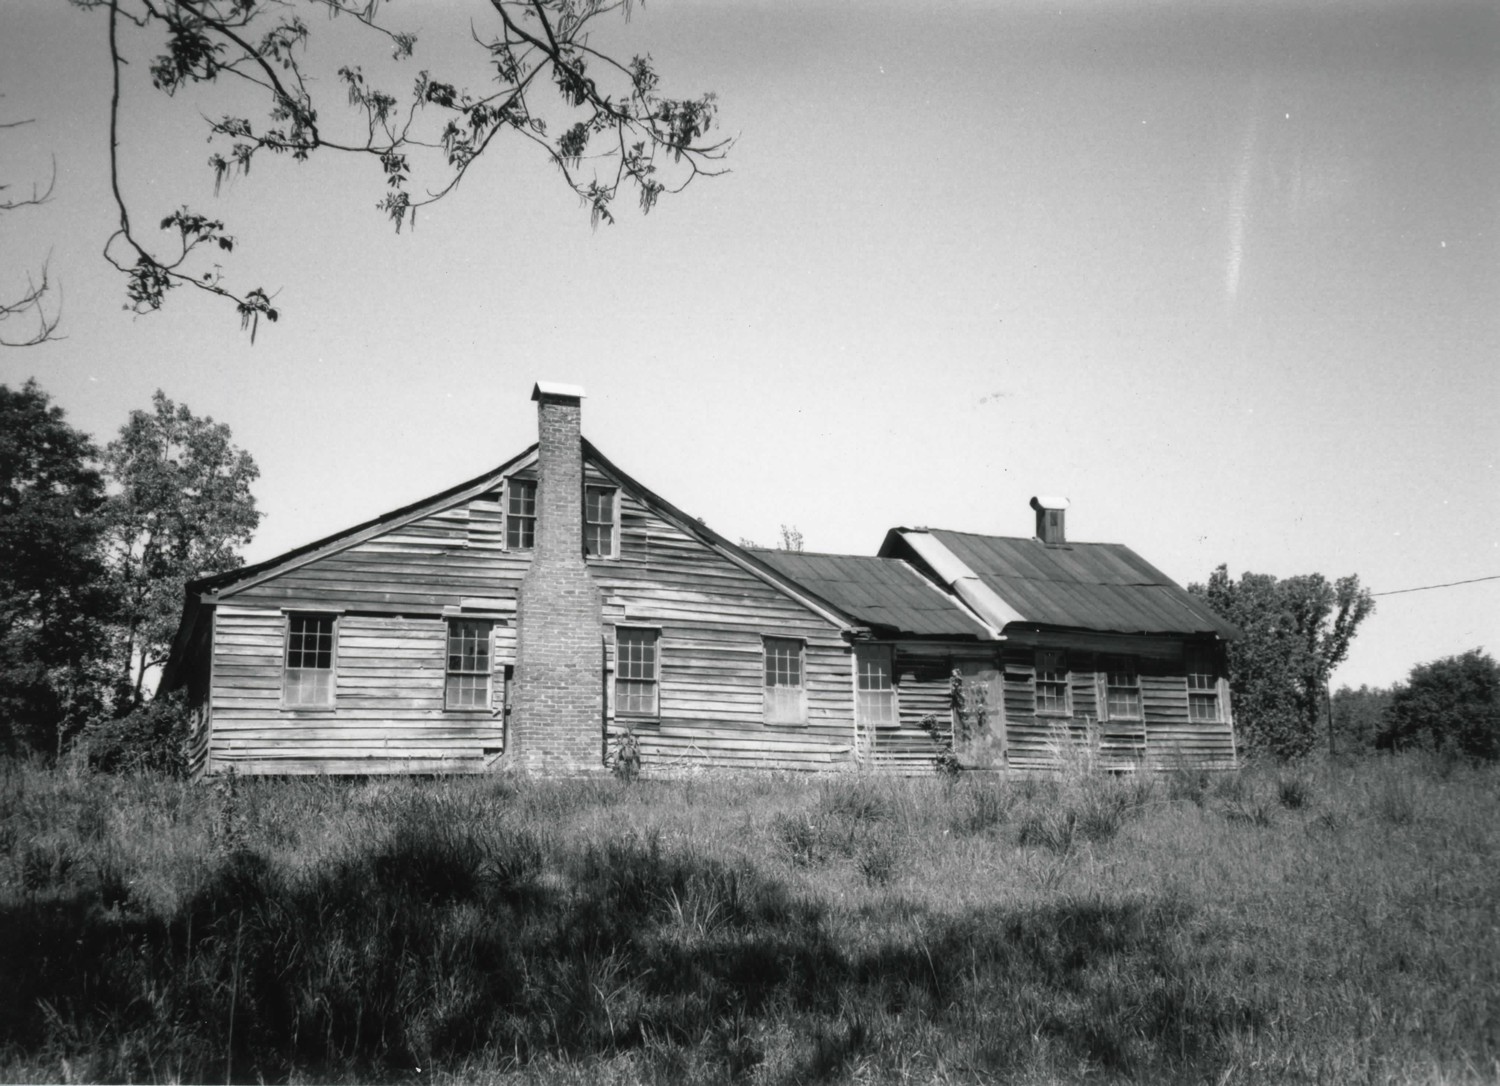 East elevation, view to west (1997)